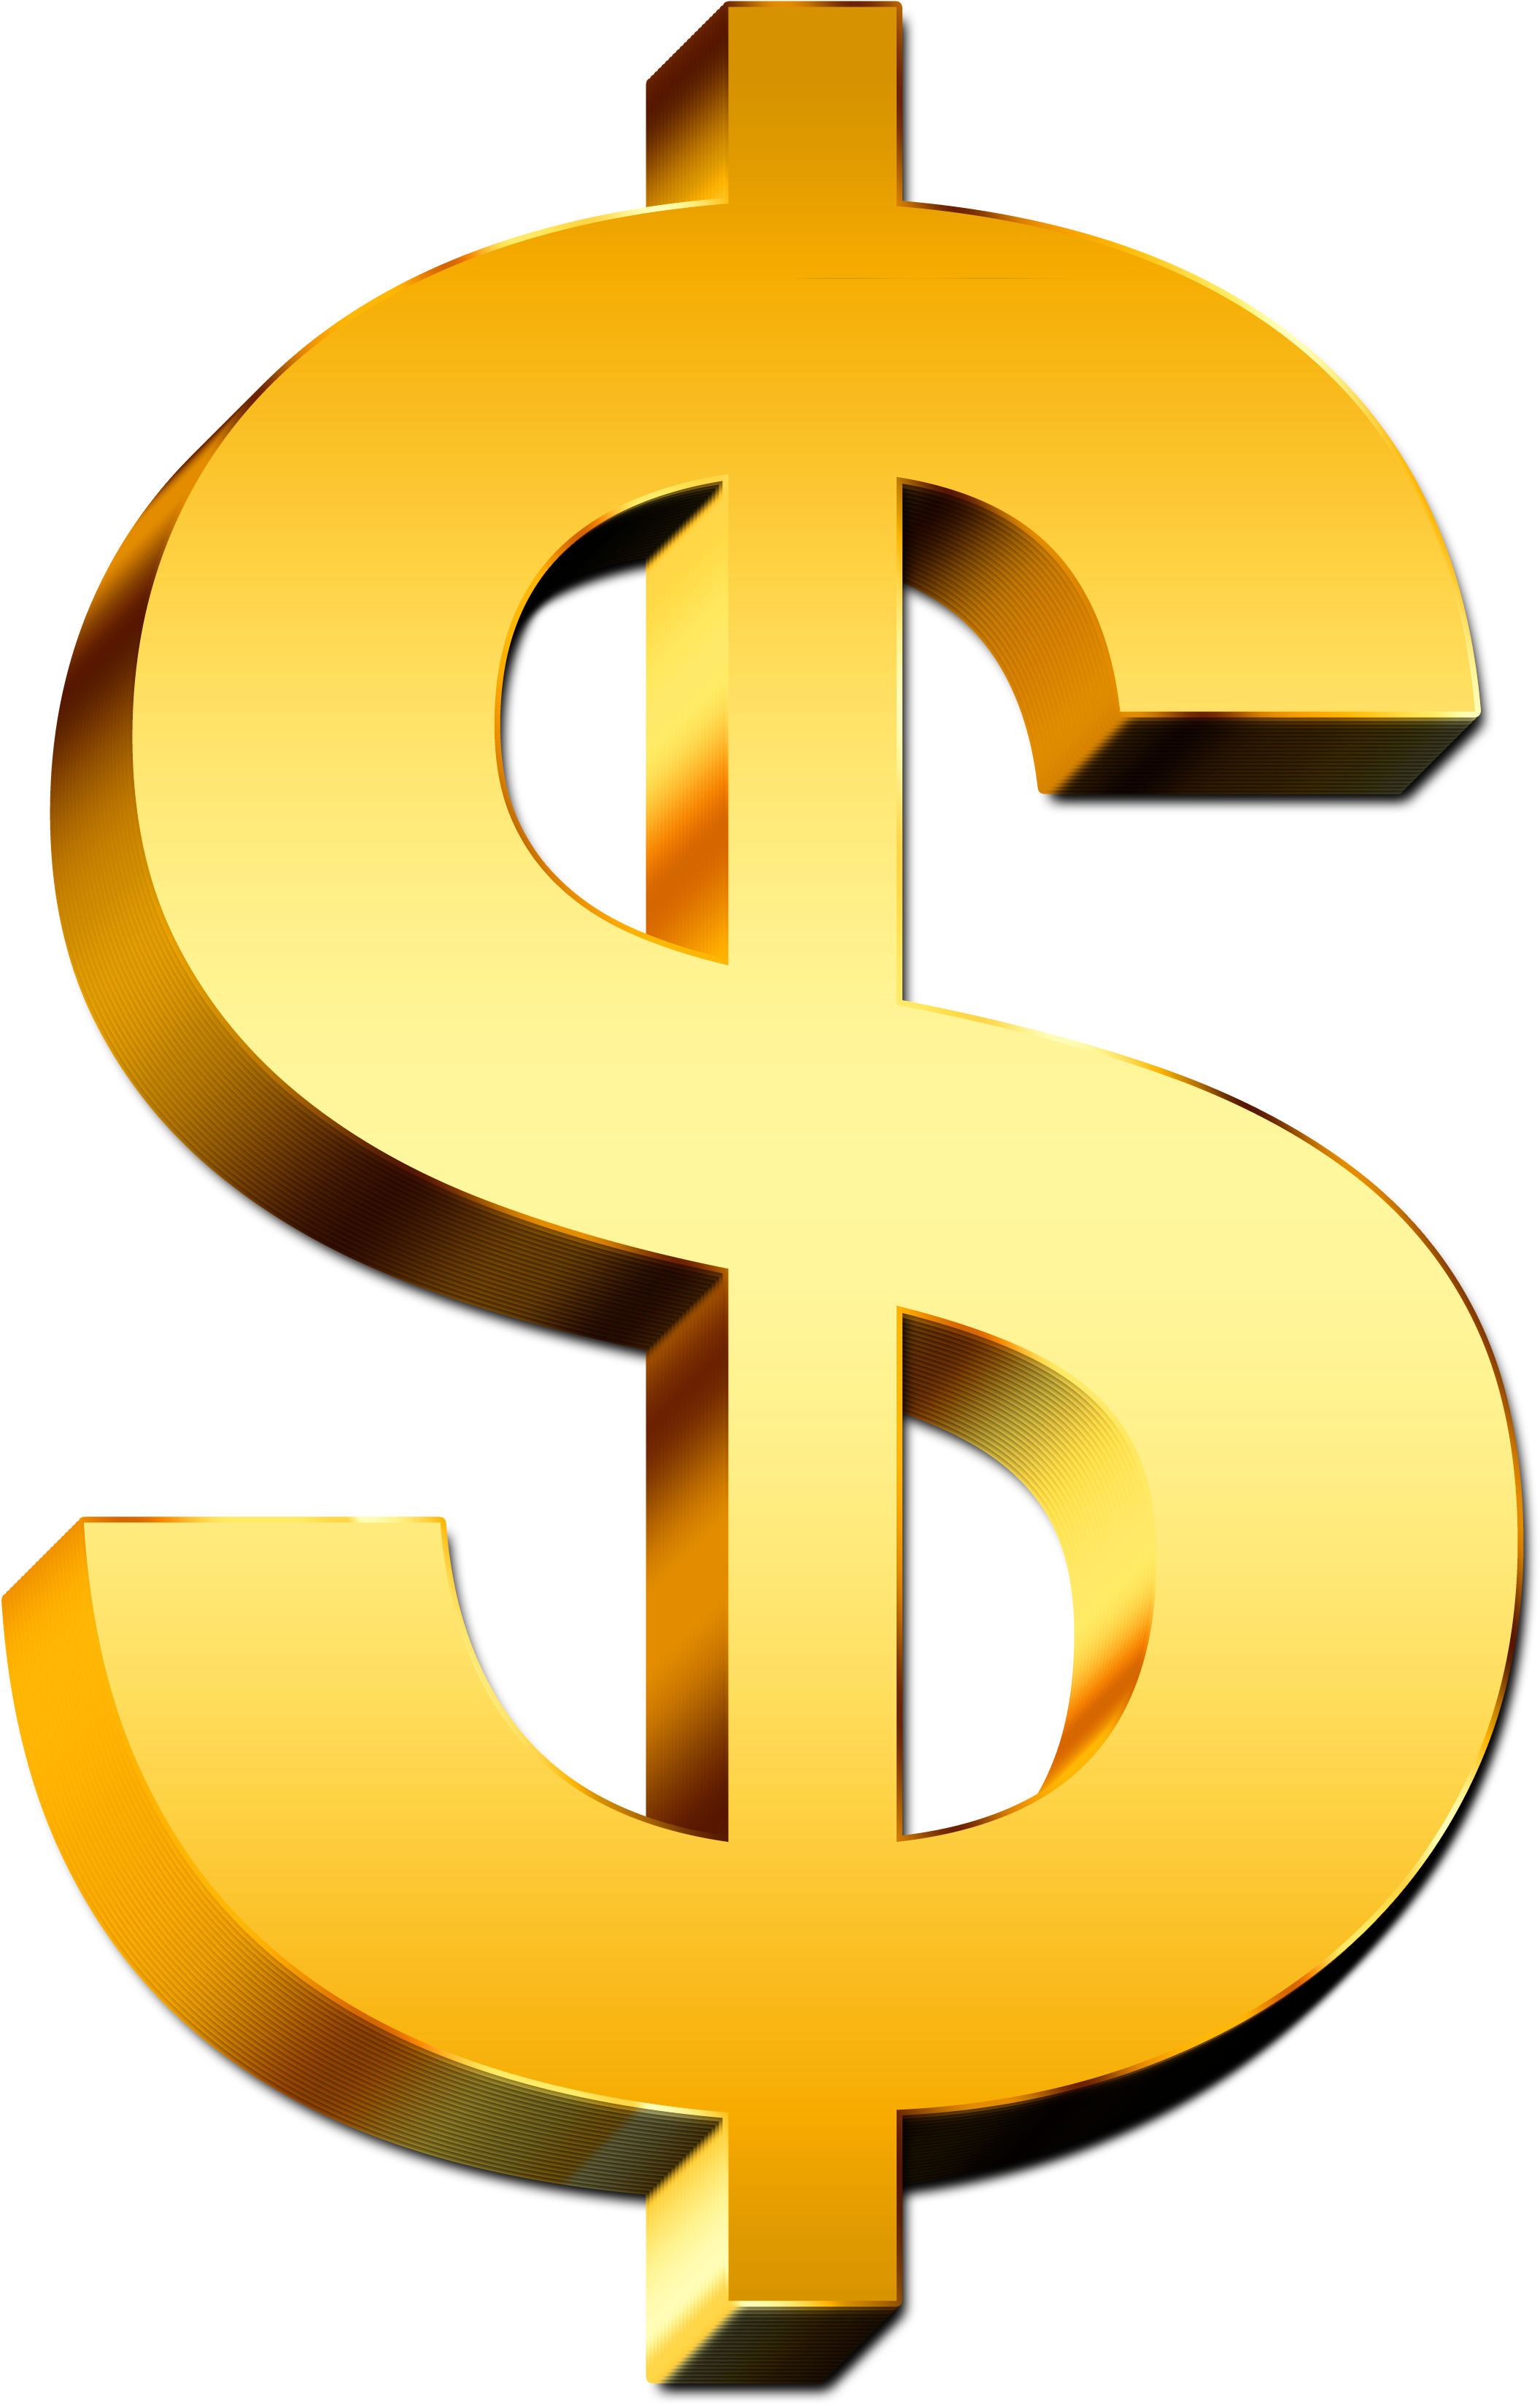 Image - Gold Dollar Sign Png (2435x3472)